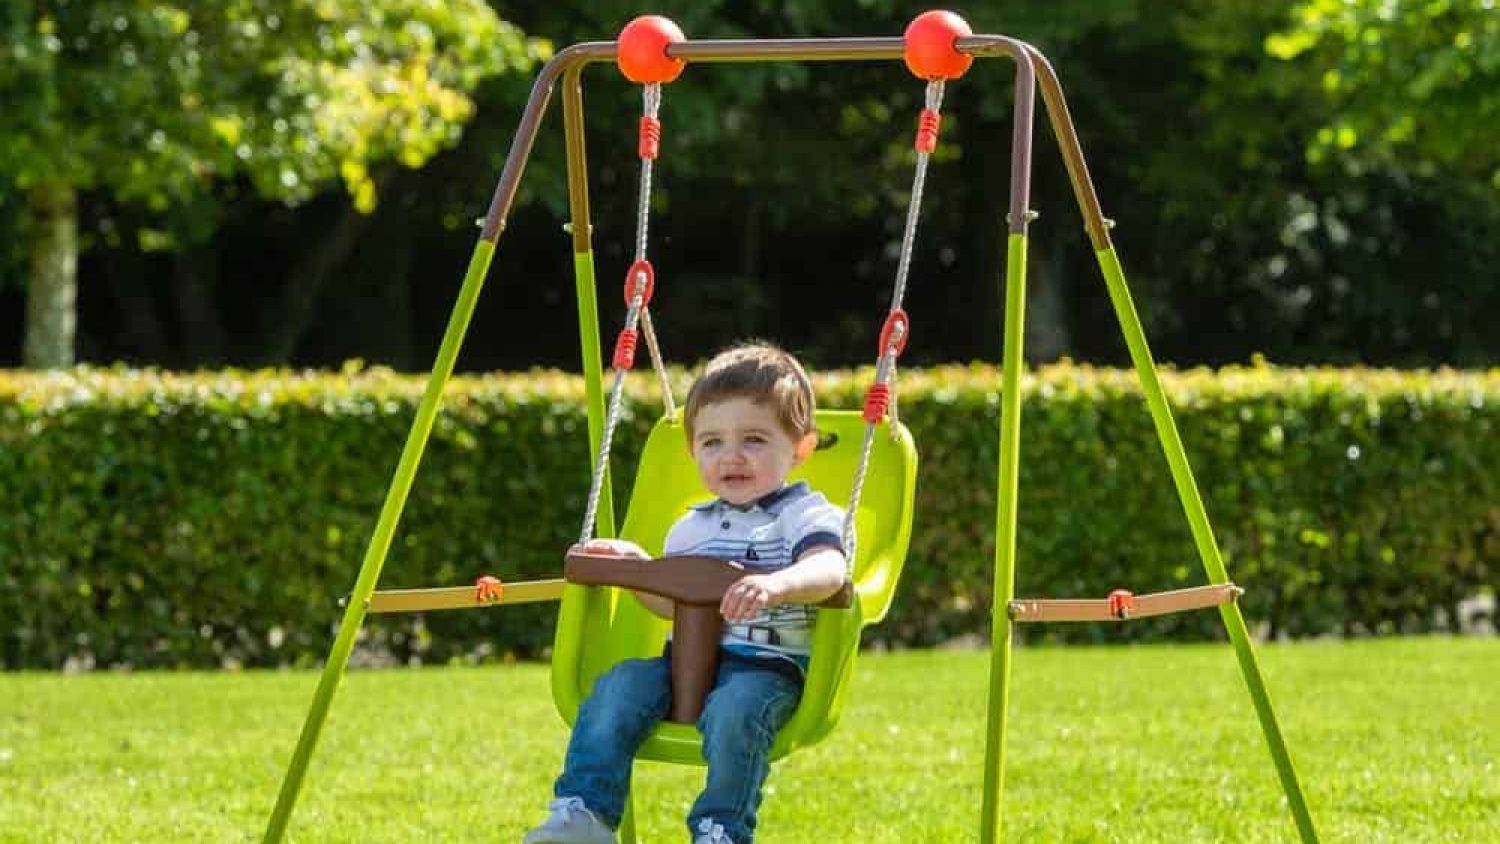 Best Outdoor Baby Swing: Top 5 Models Your Child Will Love